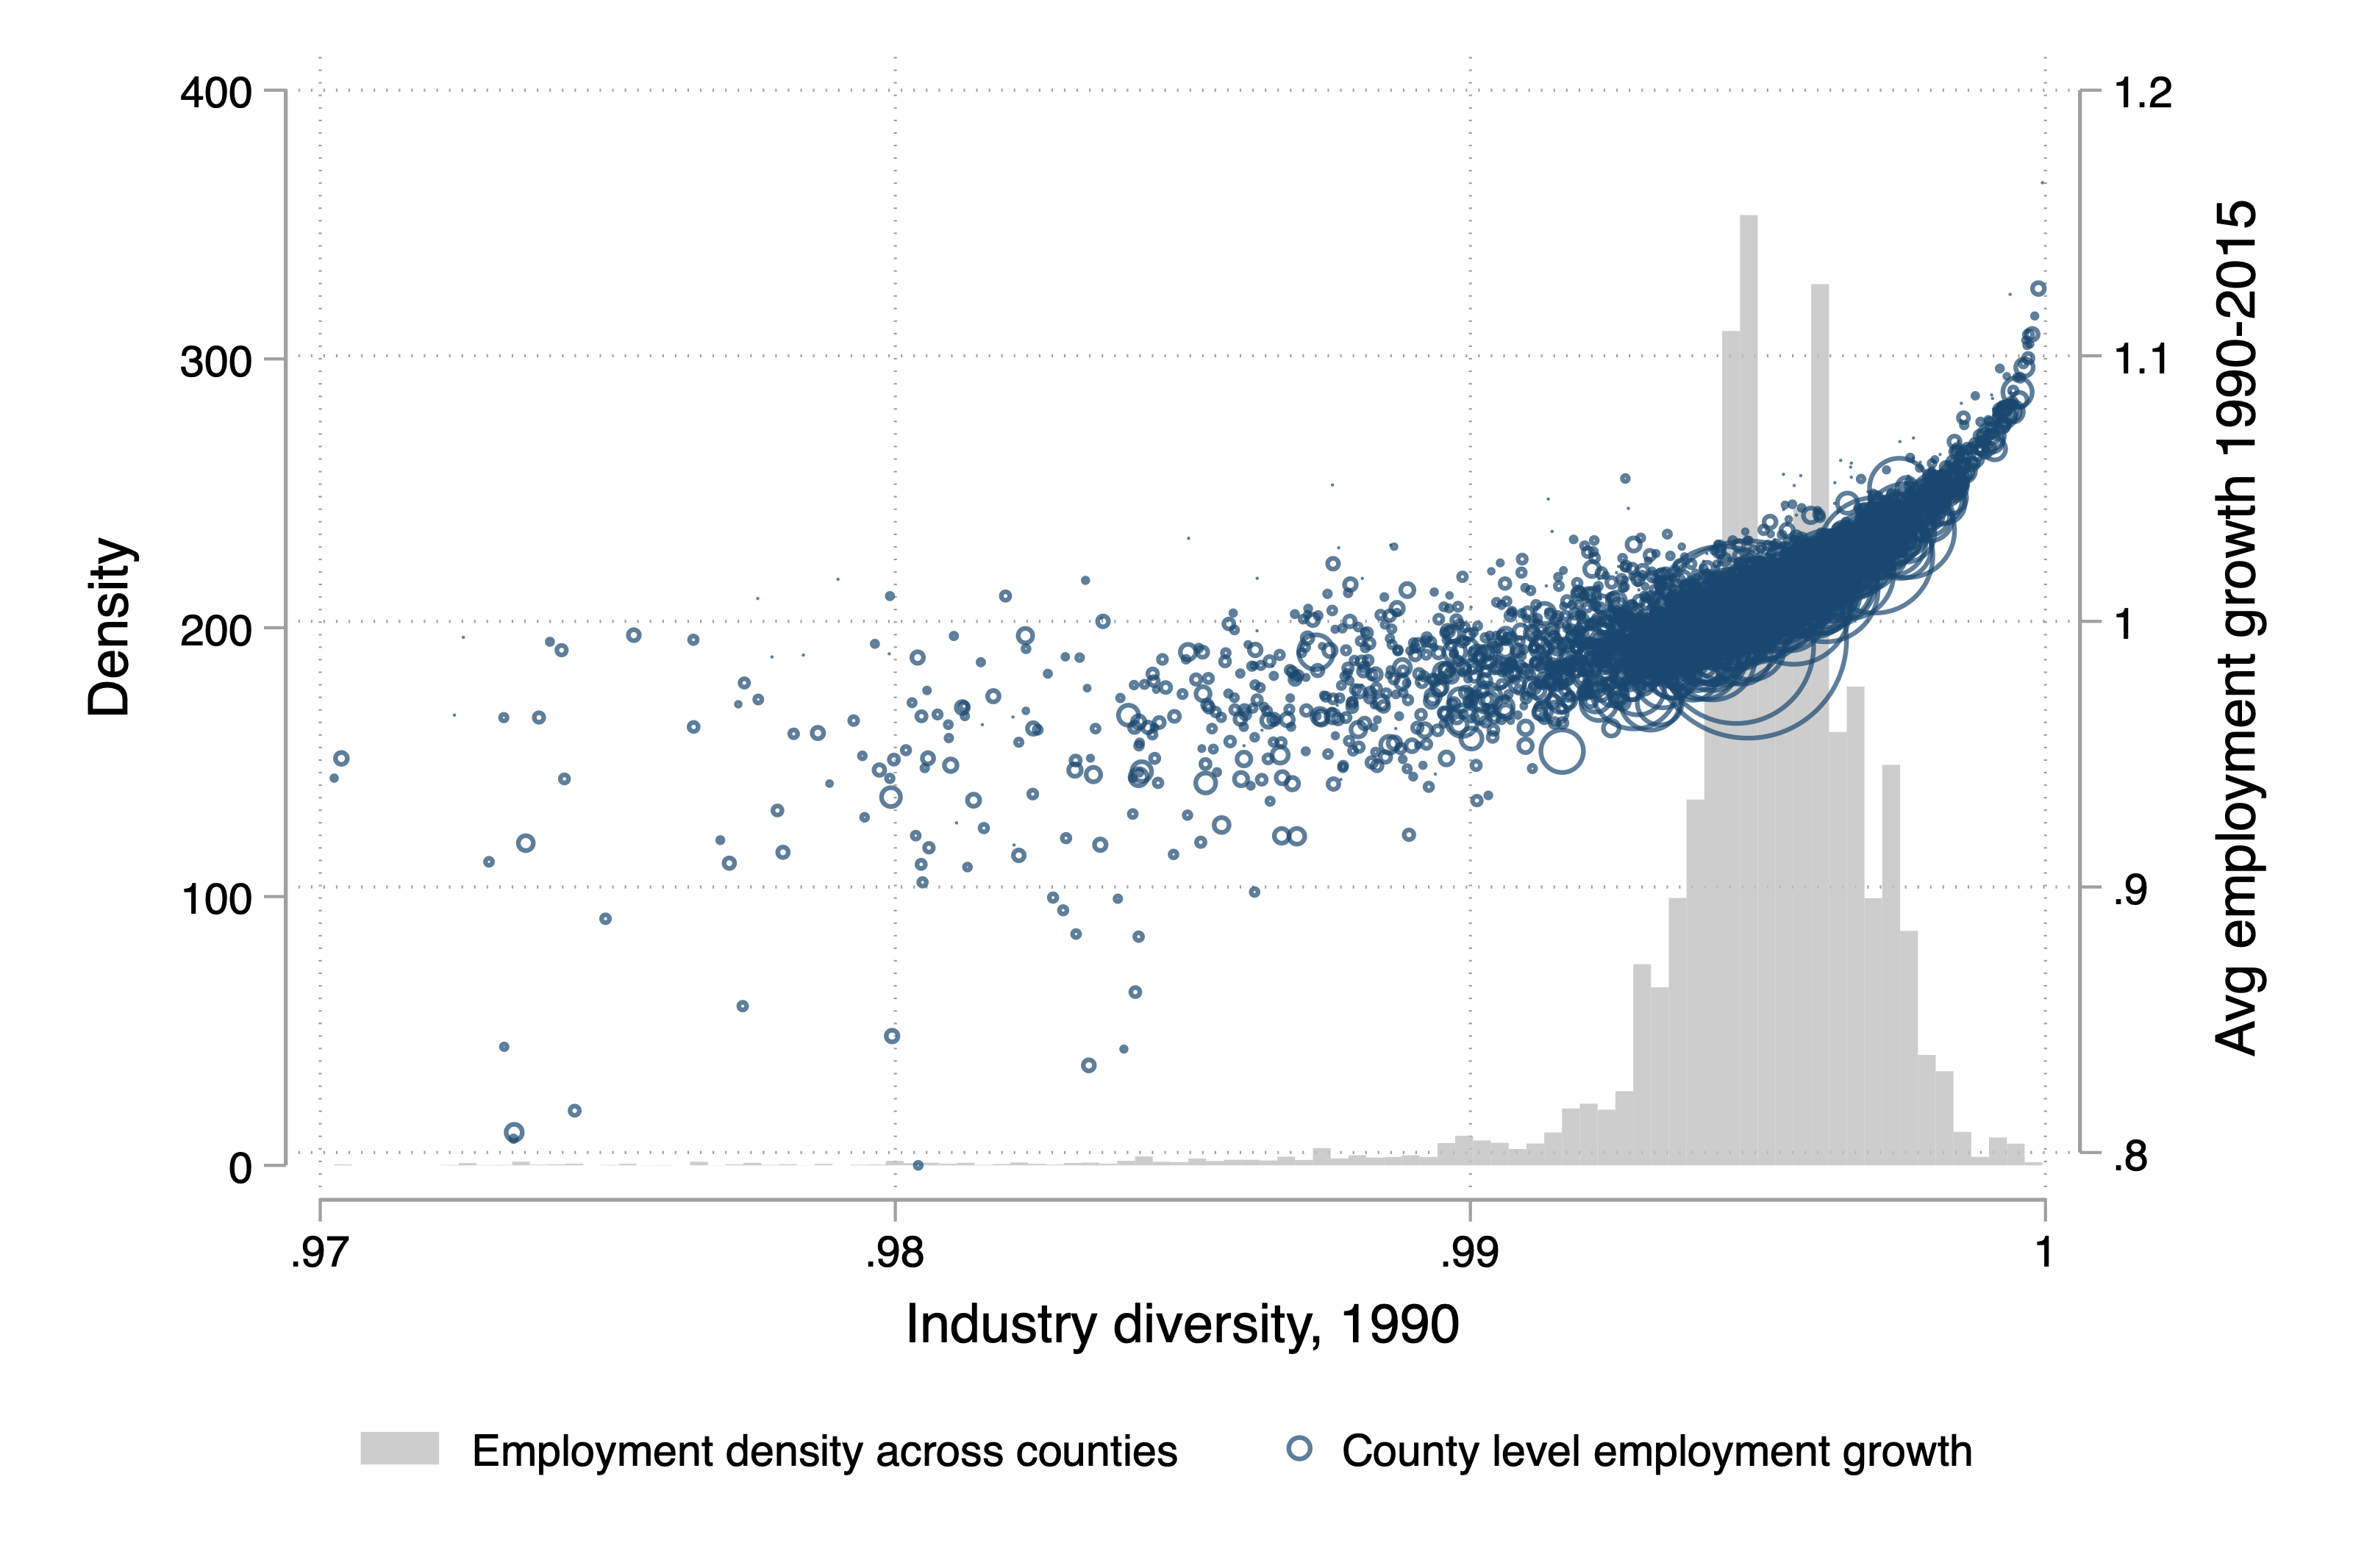 Industry diversity and employment growth